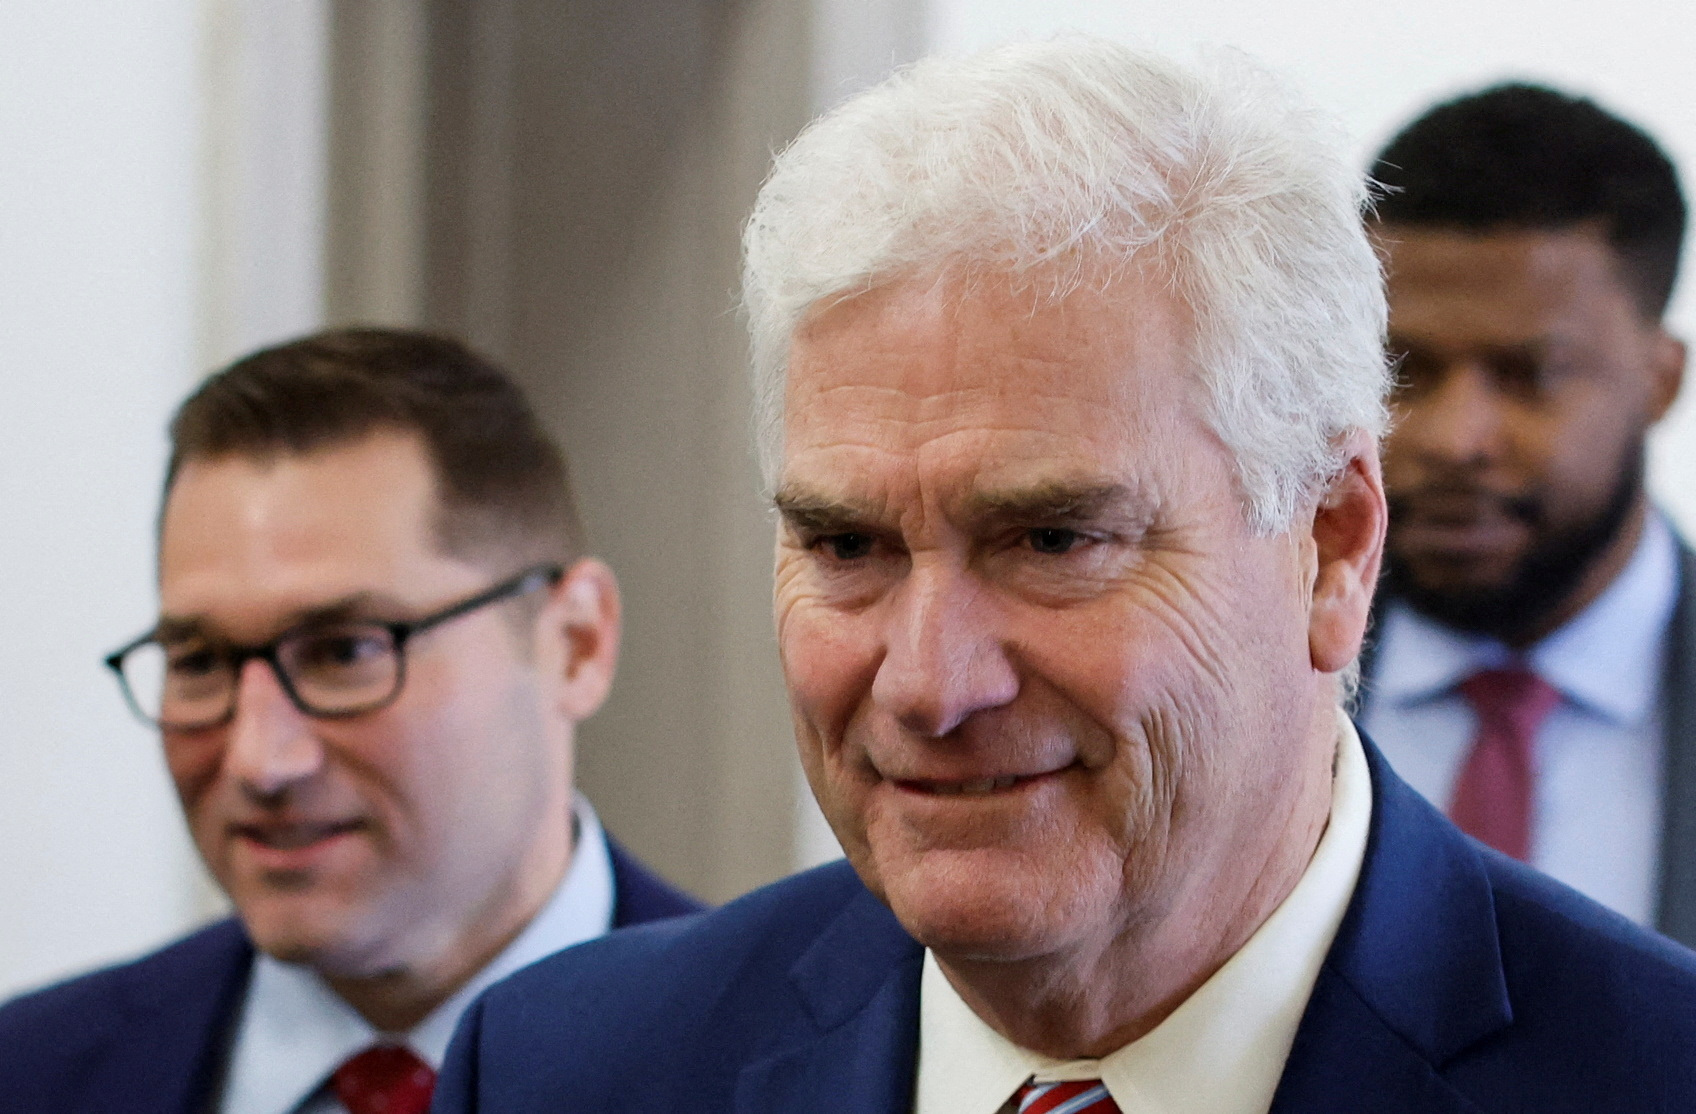 Who is Tom Emmer, new Republican nominee for US House speaker